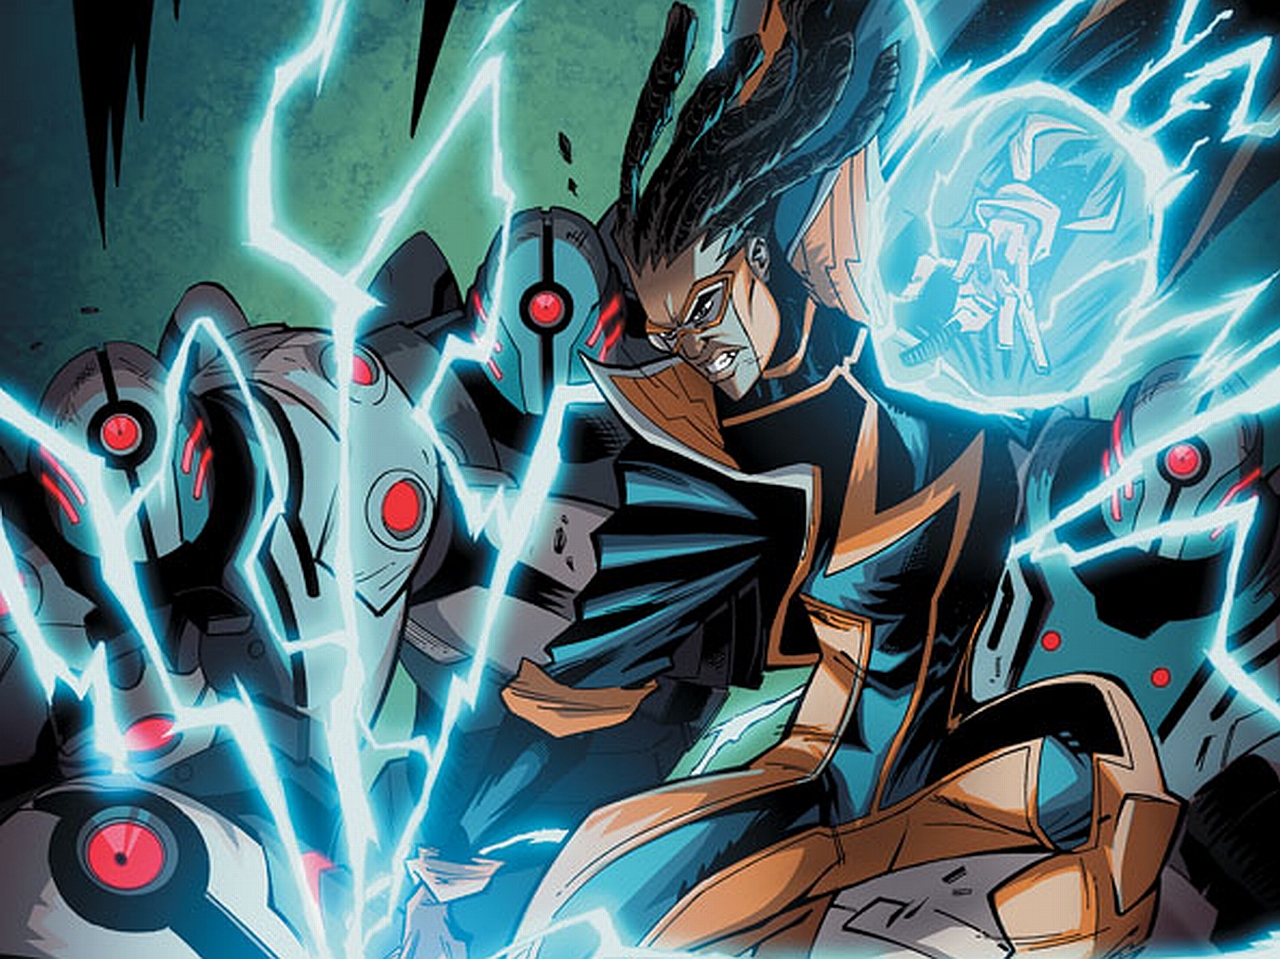 Popular Static Shock Image for Phone